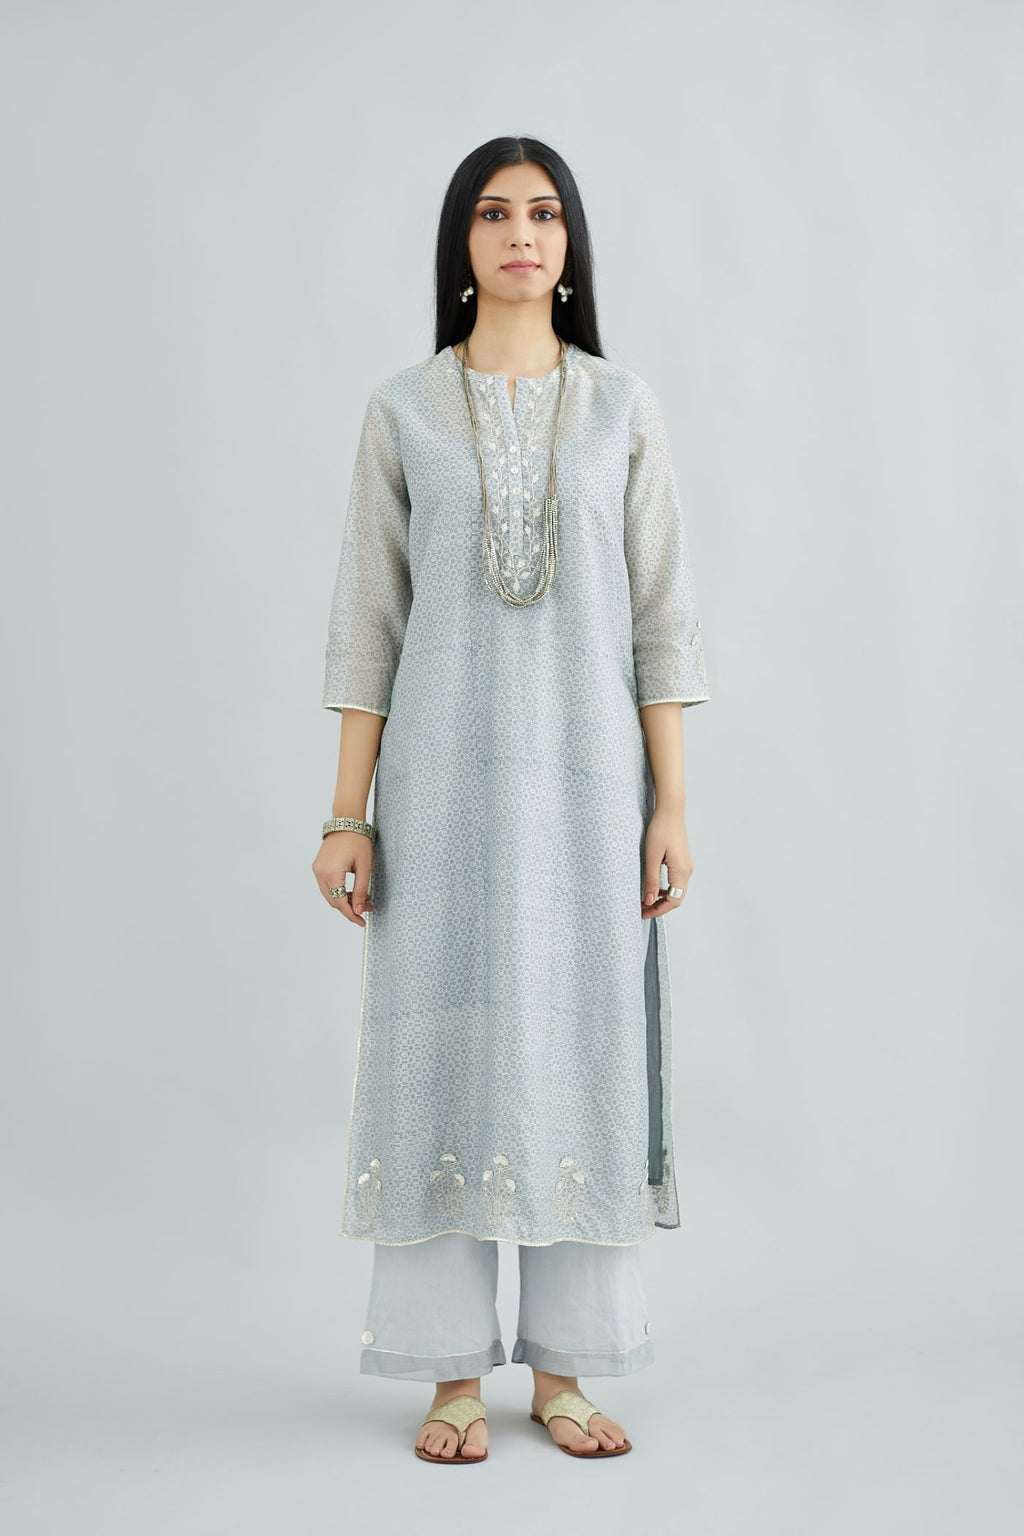 Steel blue hand block printed silk chanderi kurta with silver gota embroidery, paired with steel blue straight pants with gota and silk chanderi fabric detaling at bottom hem